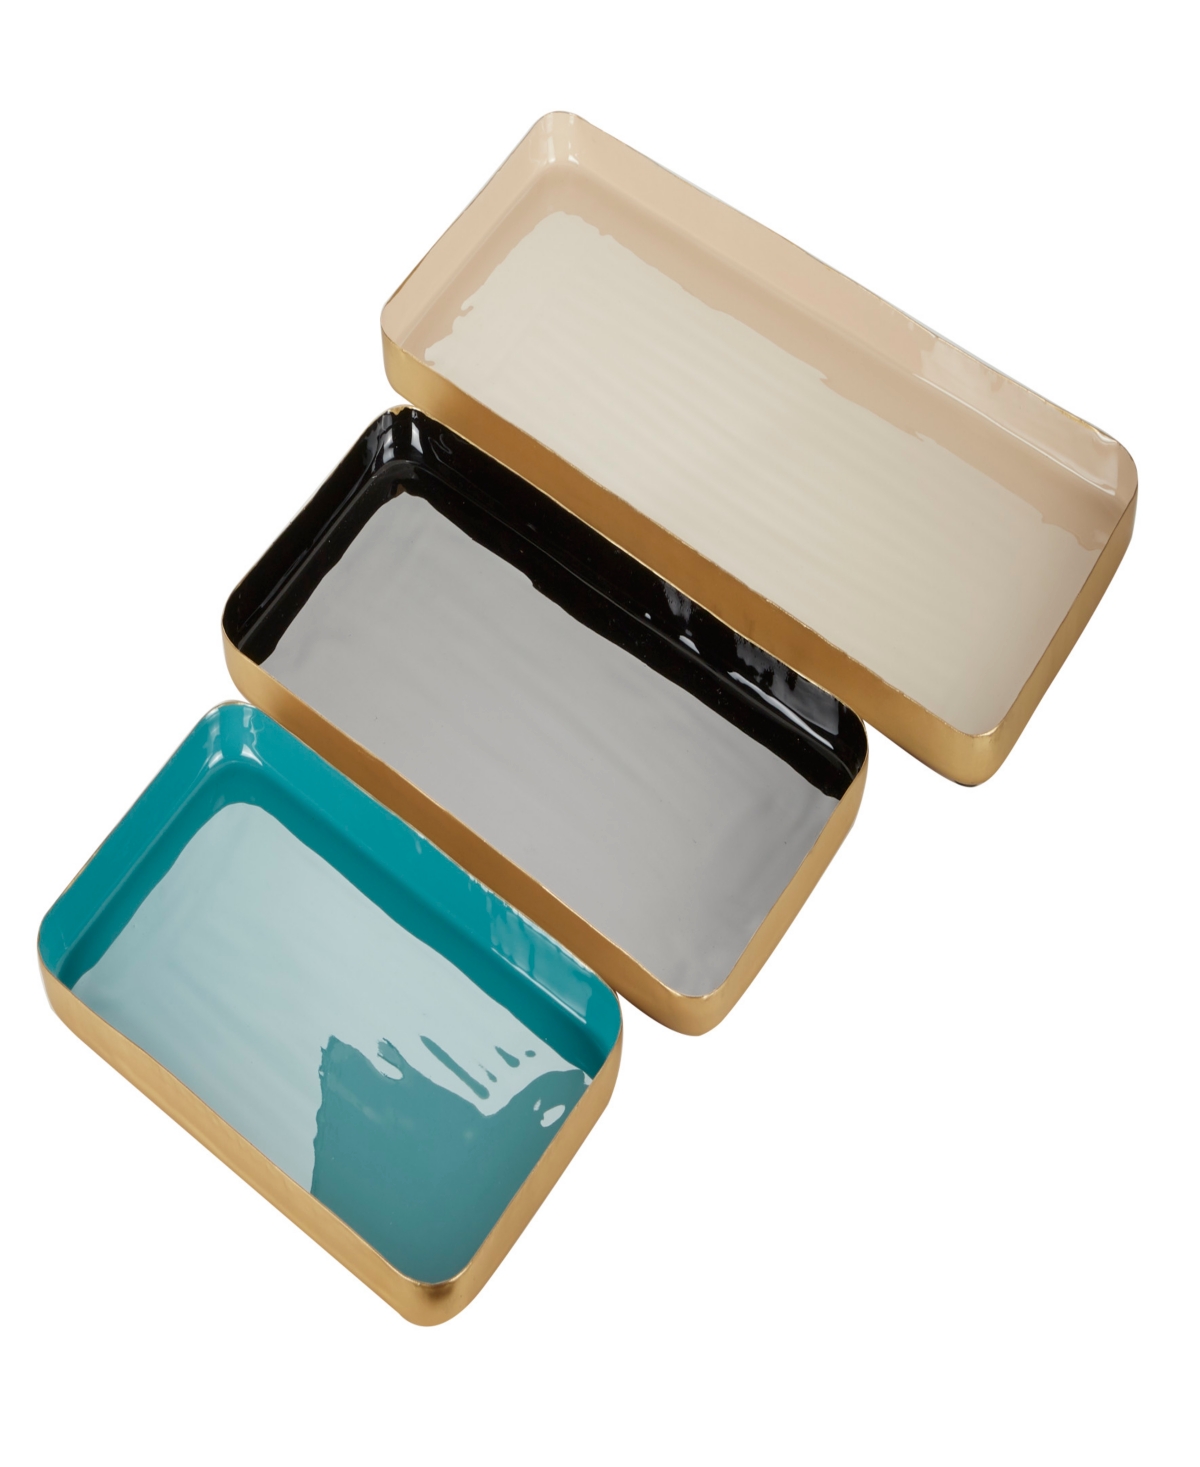 Rosemary Lane Mango Wood Tray With Enamel Interior, Set Of 3, 18", 15", 13" W In Multi Colored